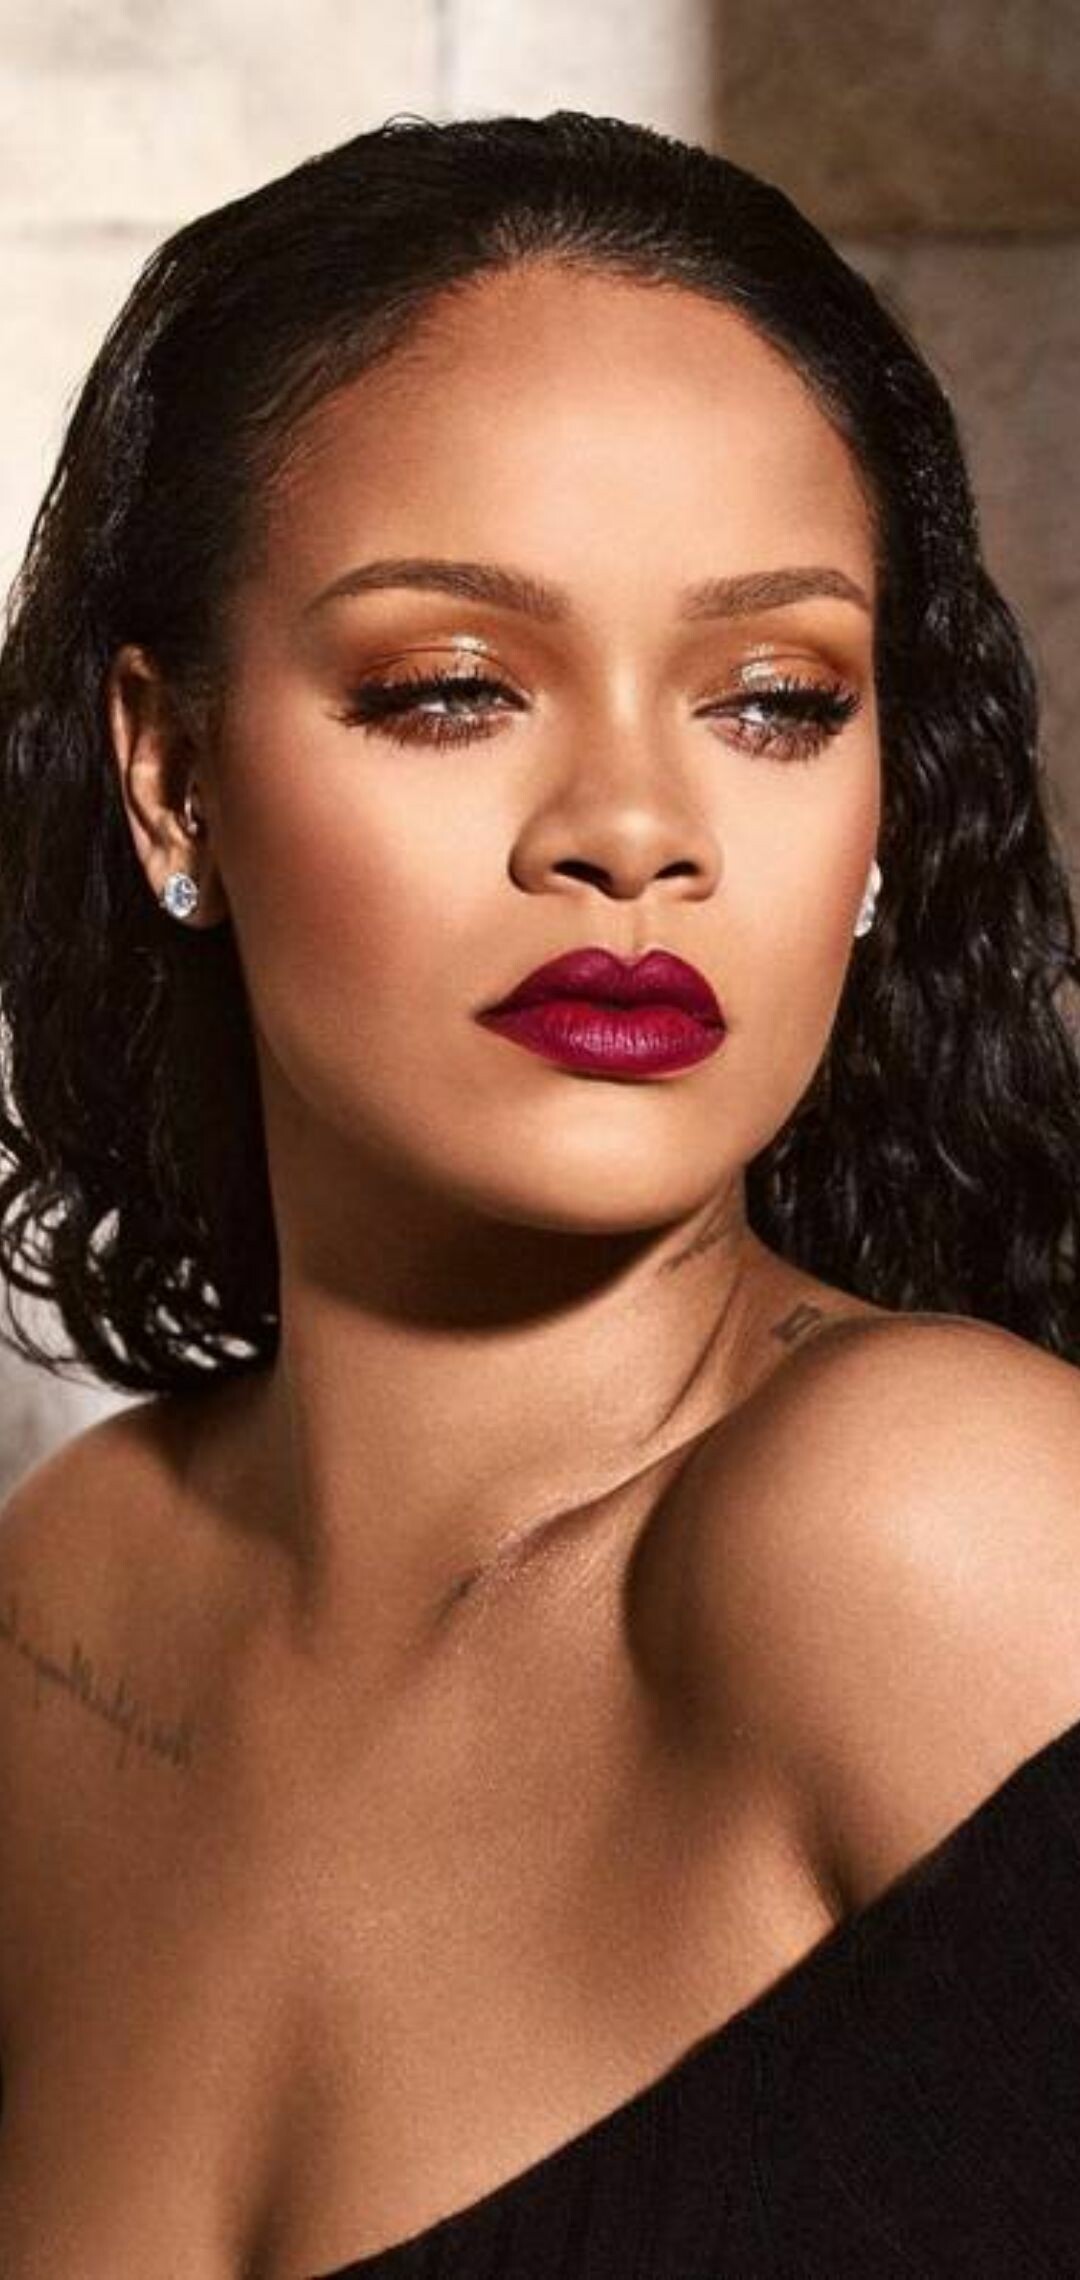 Rihanna: Barbadian singer, songwriter, Won countless awards including Grammys, Brits, MTV awards and World Music Awards. 1080x2280 HD Background.